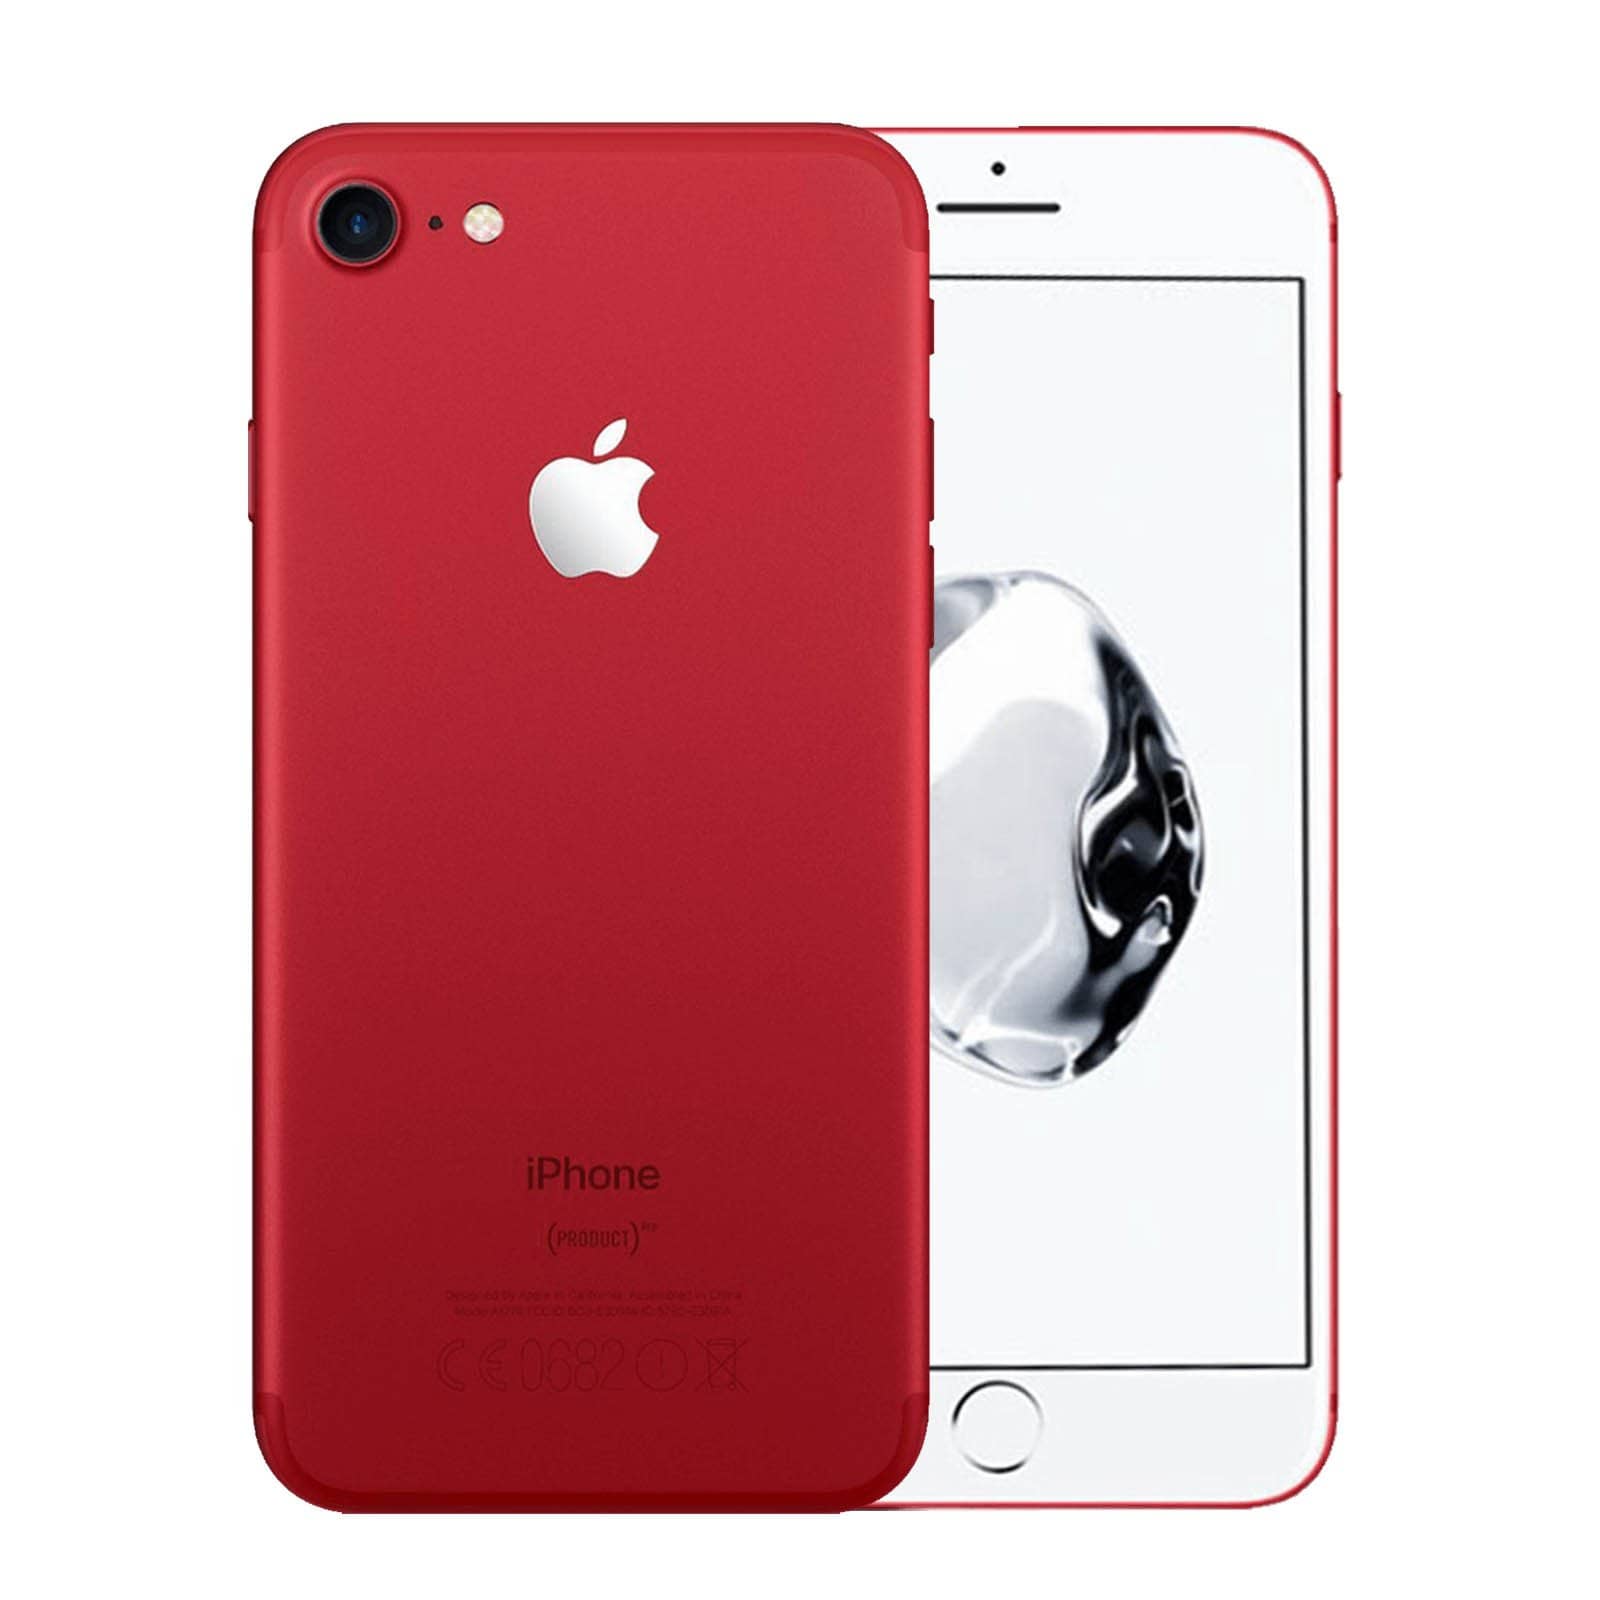 Apple iPhone 7 128GB Product Red Good - Unlocked 128GB Red Good